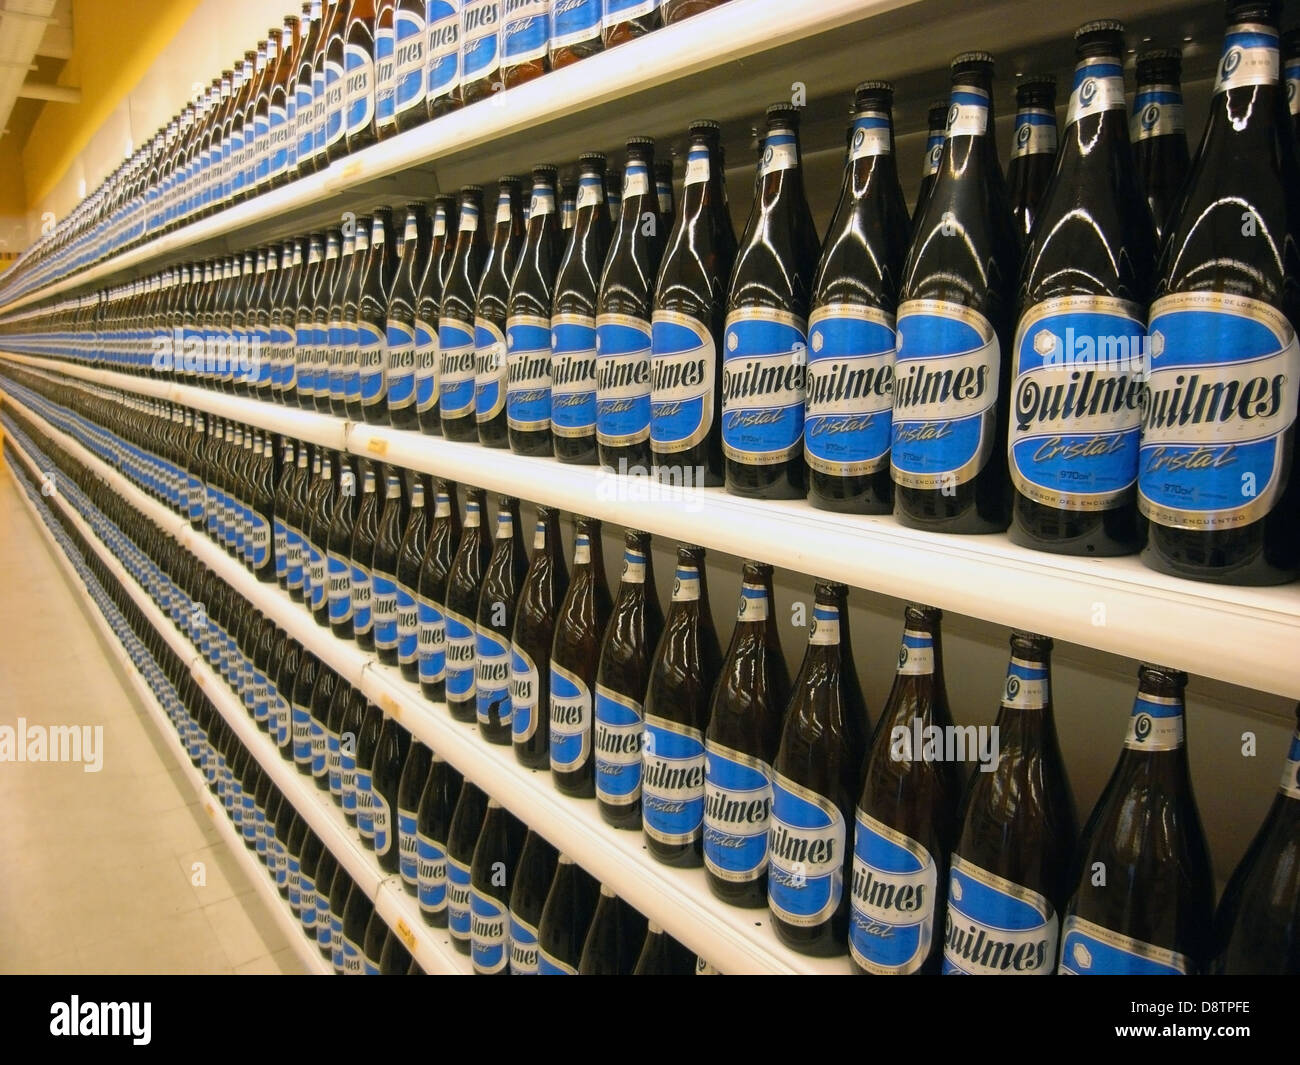 Supermarket shelves overstocked with Quilmes beer bottles, Buenos Aires, Argentina. No PR Stock Photo